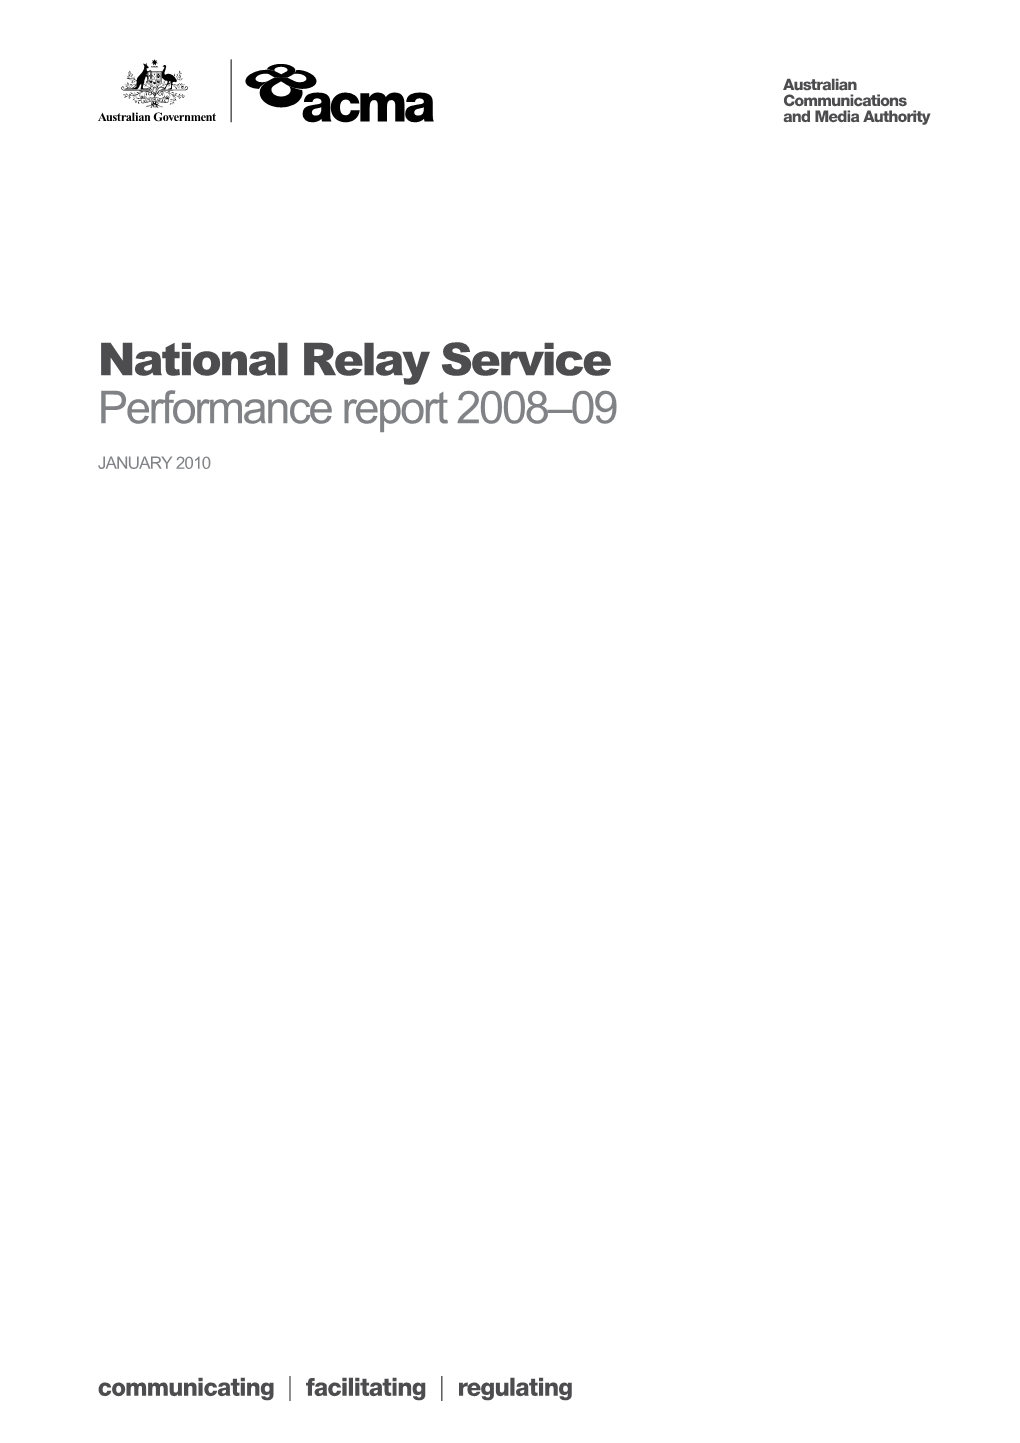 National Relay Service - Performance Report 2008-09